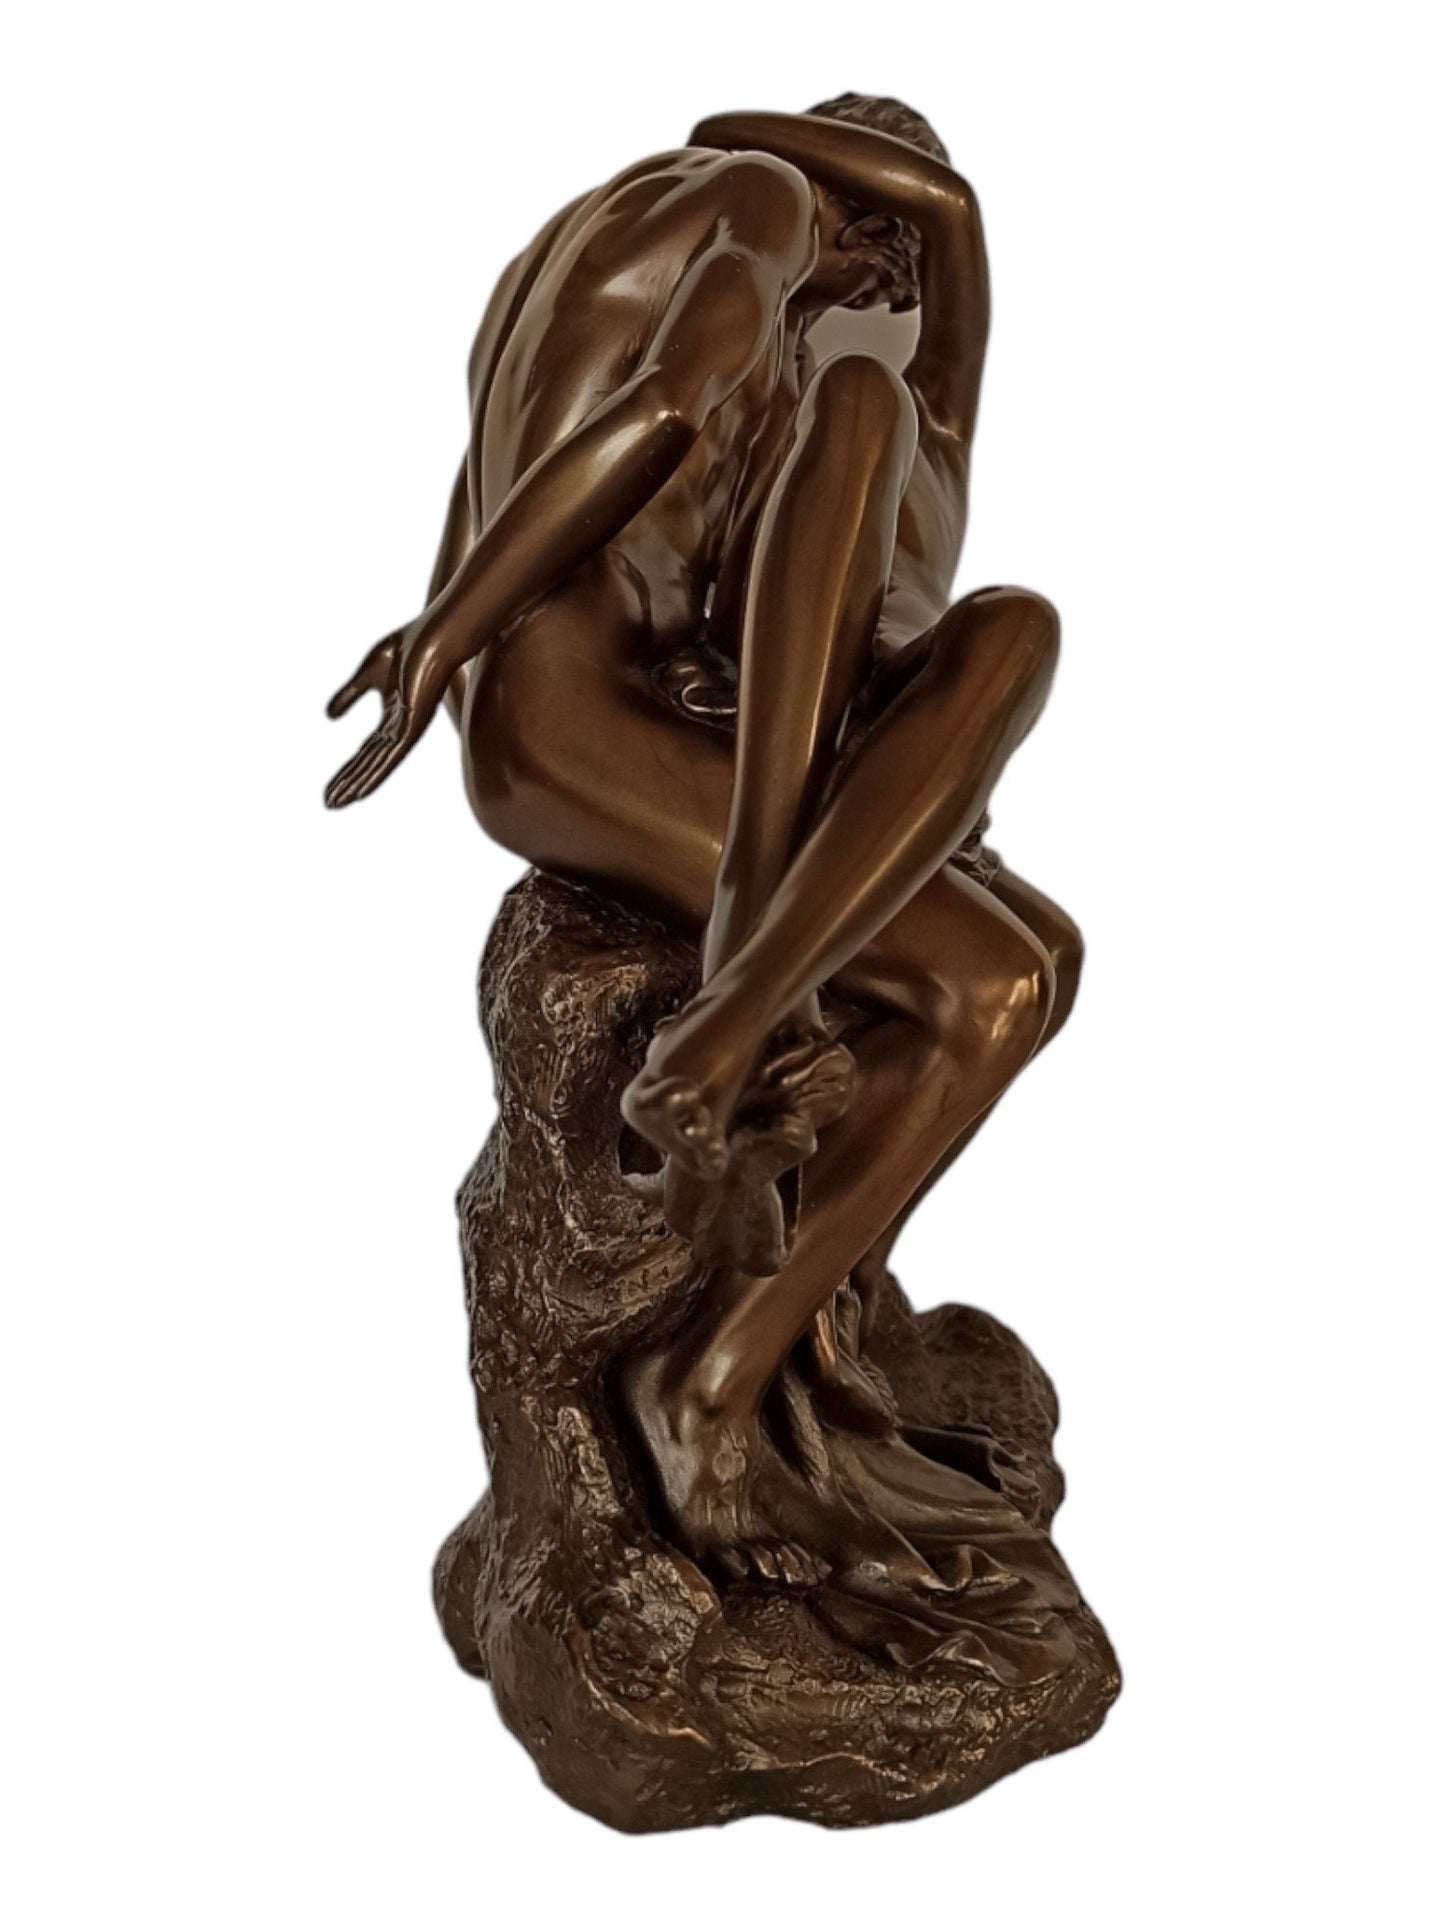 Couple Kissing - The ultimate expression of Love - Indicates Affection and Intimacy between two people - Cold Cast Bronze Resin